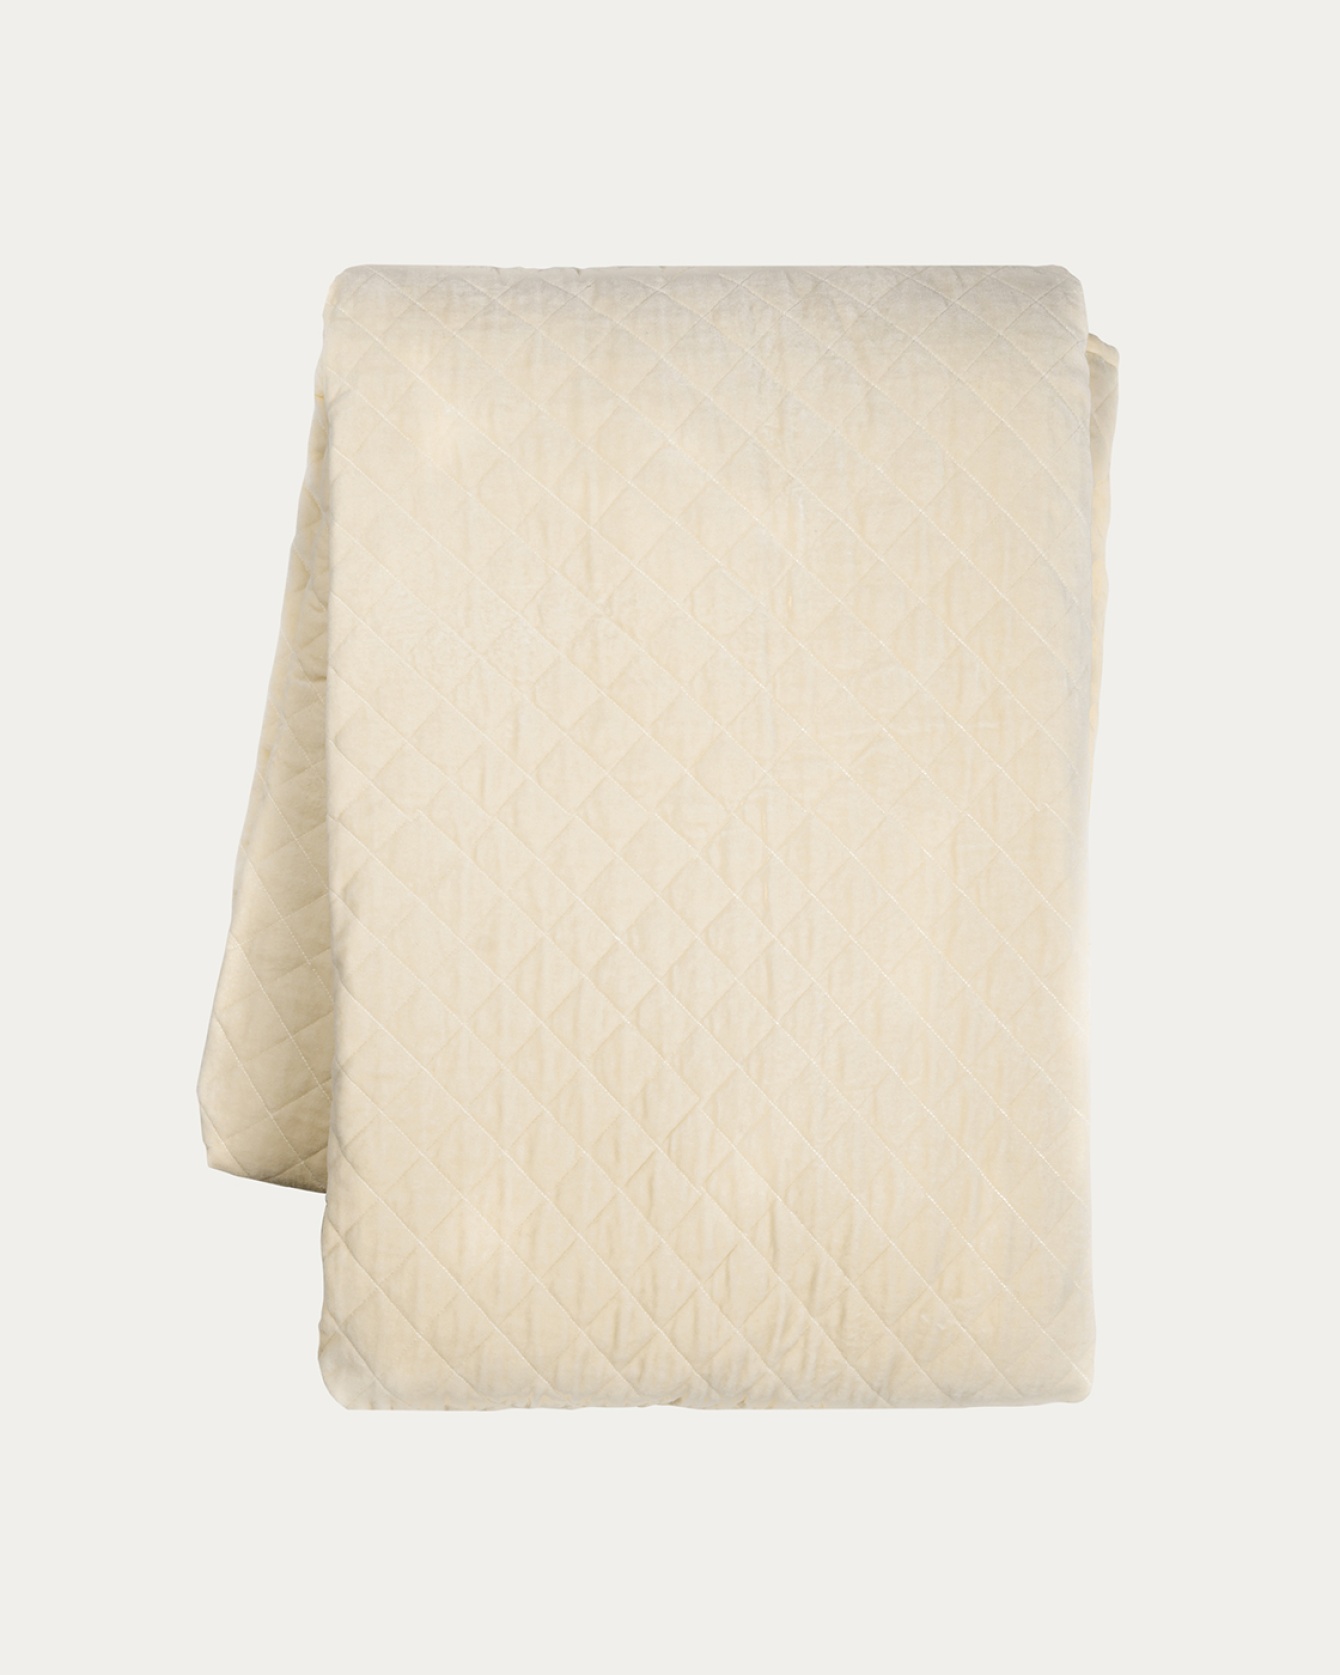 Product image creamy beige PICCOLO bedspread in soft cotton velvet for single bed from LINUM DESIGN. Size 170x260 cm.